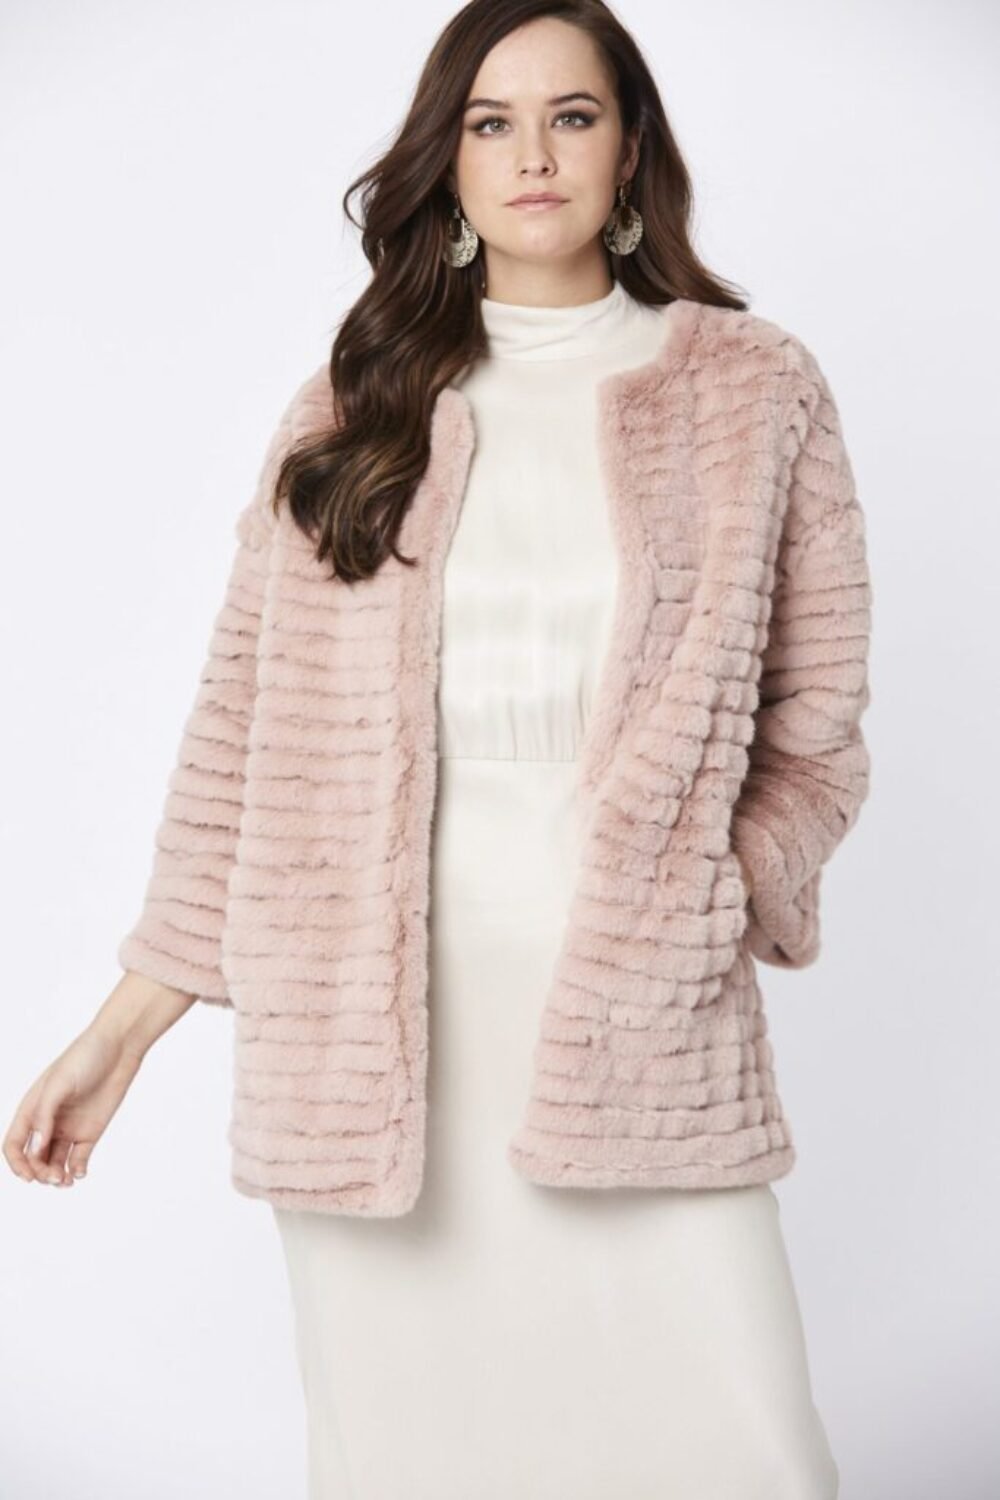 Shop Lux Pink Faux Fur Over-Sized Coat and women's luxury and designer clothes at www.lux-apparel.co.uk